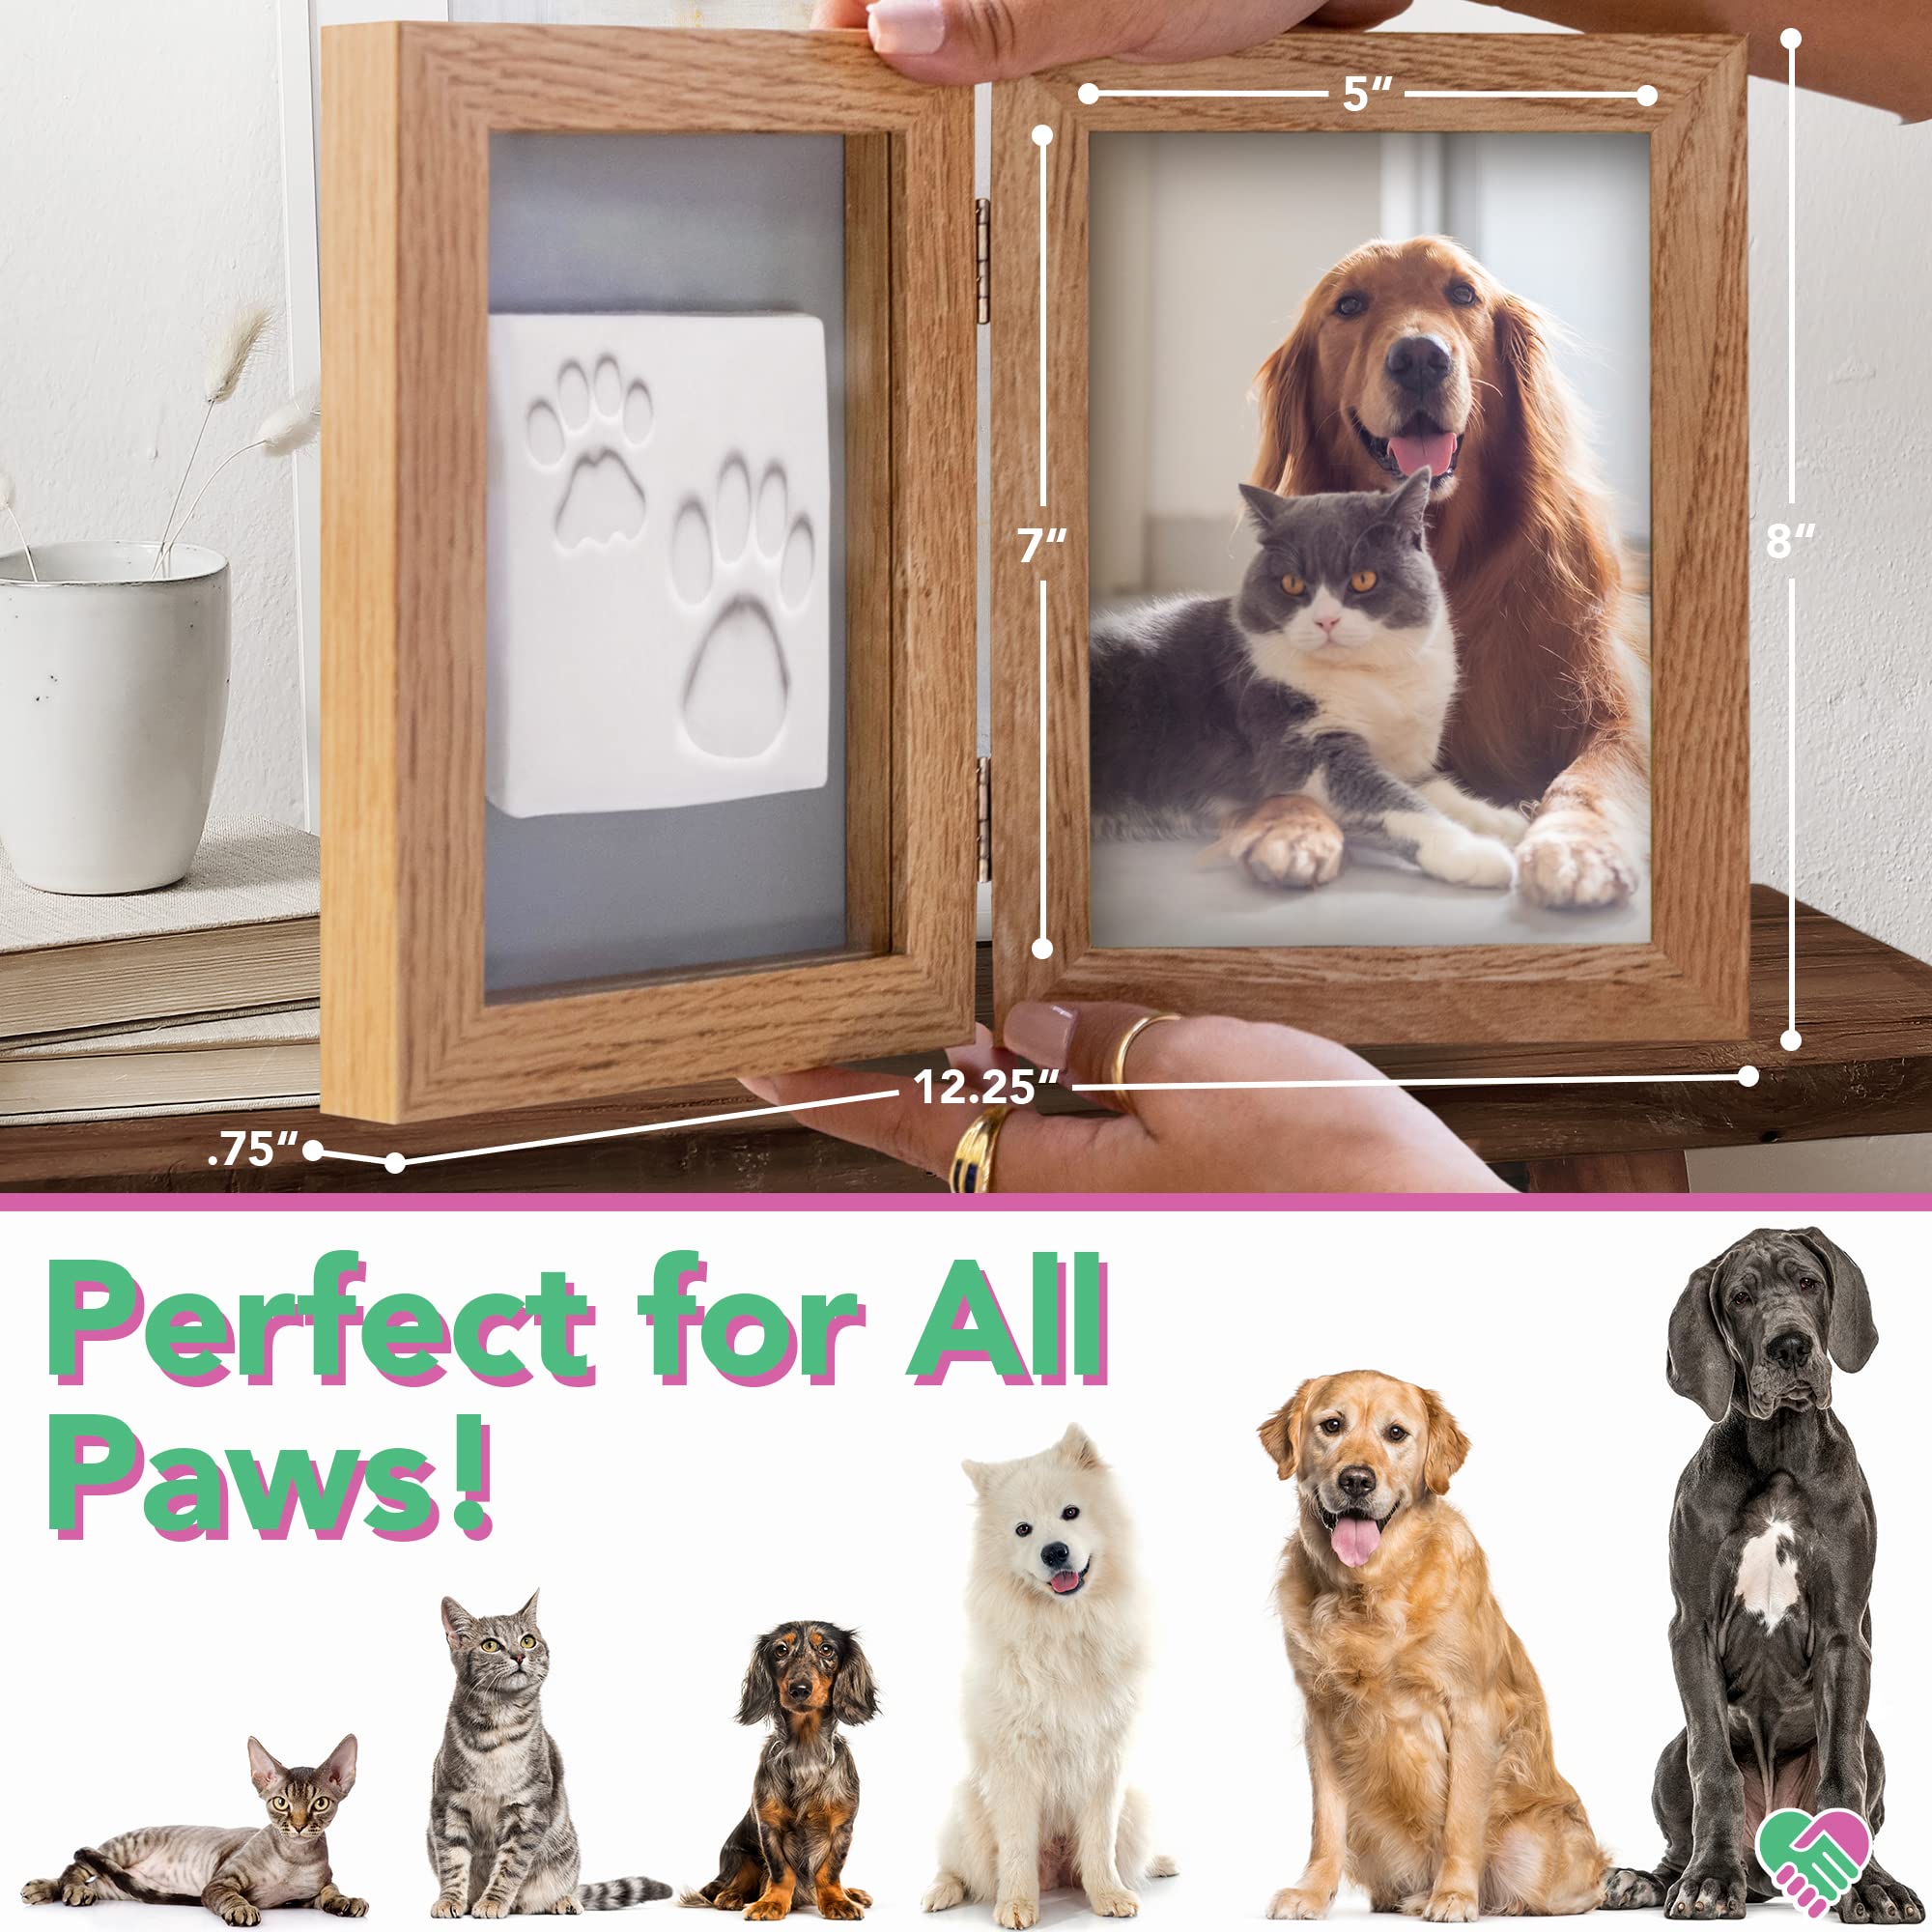 Paw Prints Dog Care Package - The Monday Box